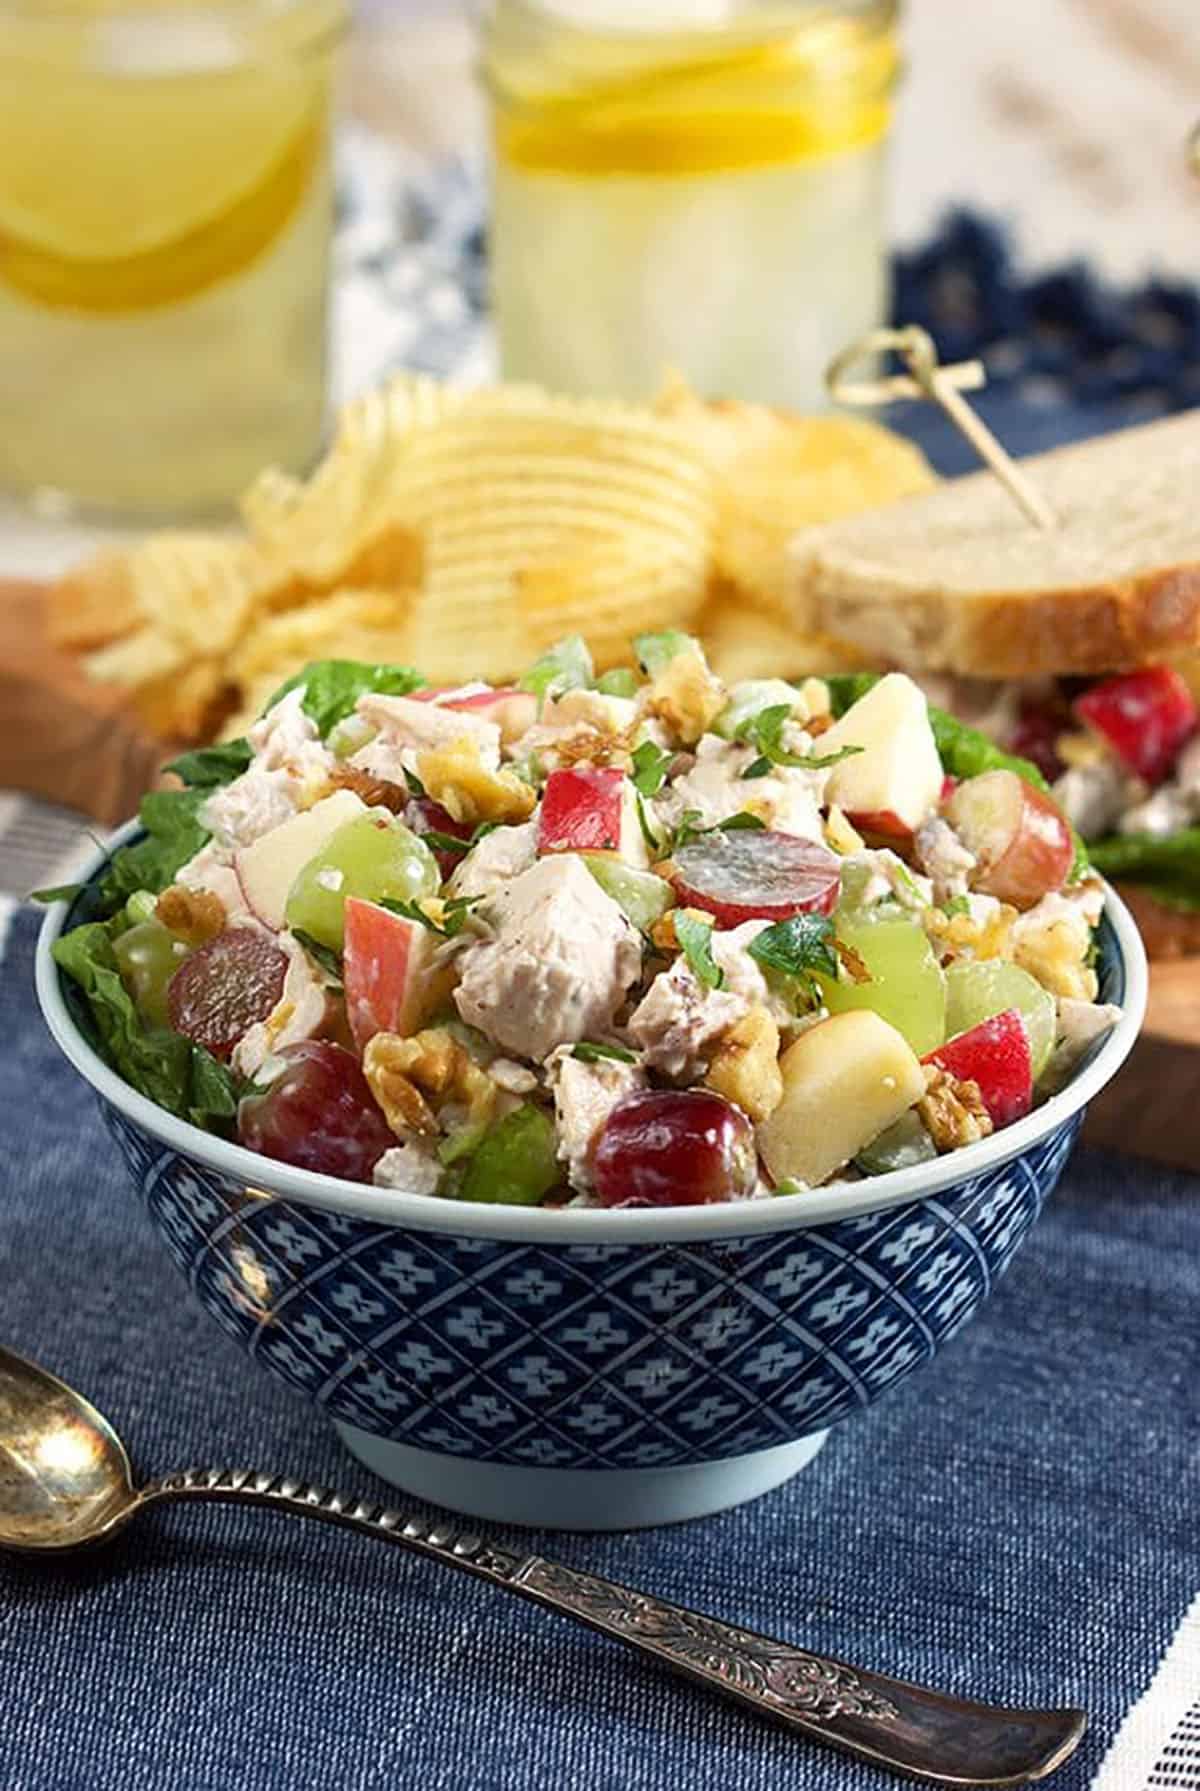 Chicken Waldorf salad in a blue and white bowl